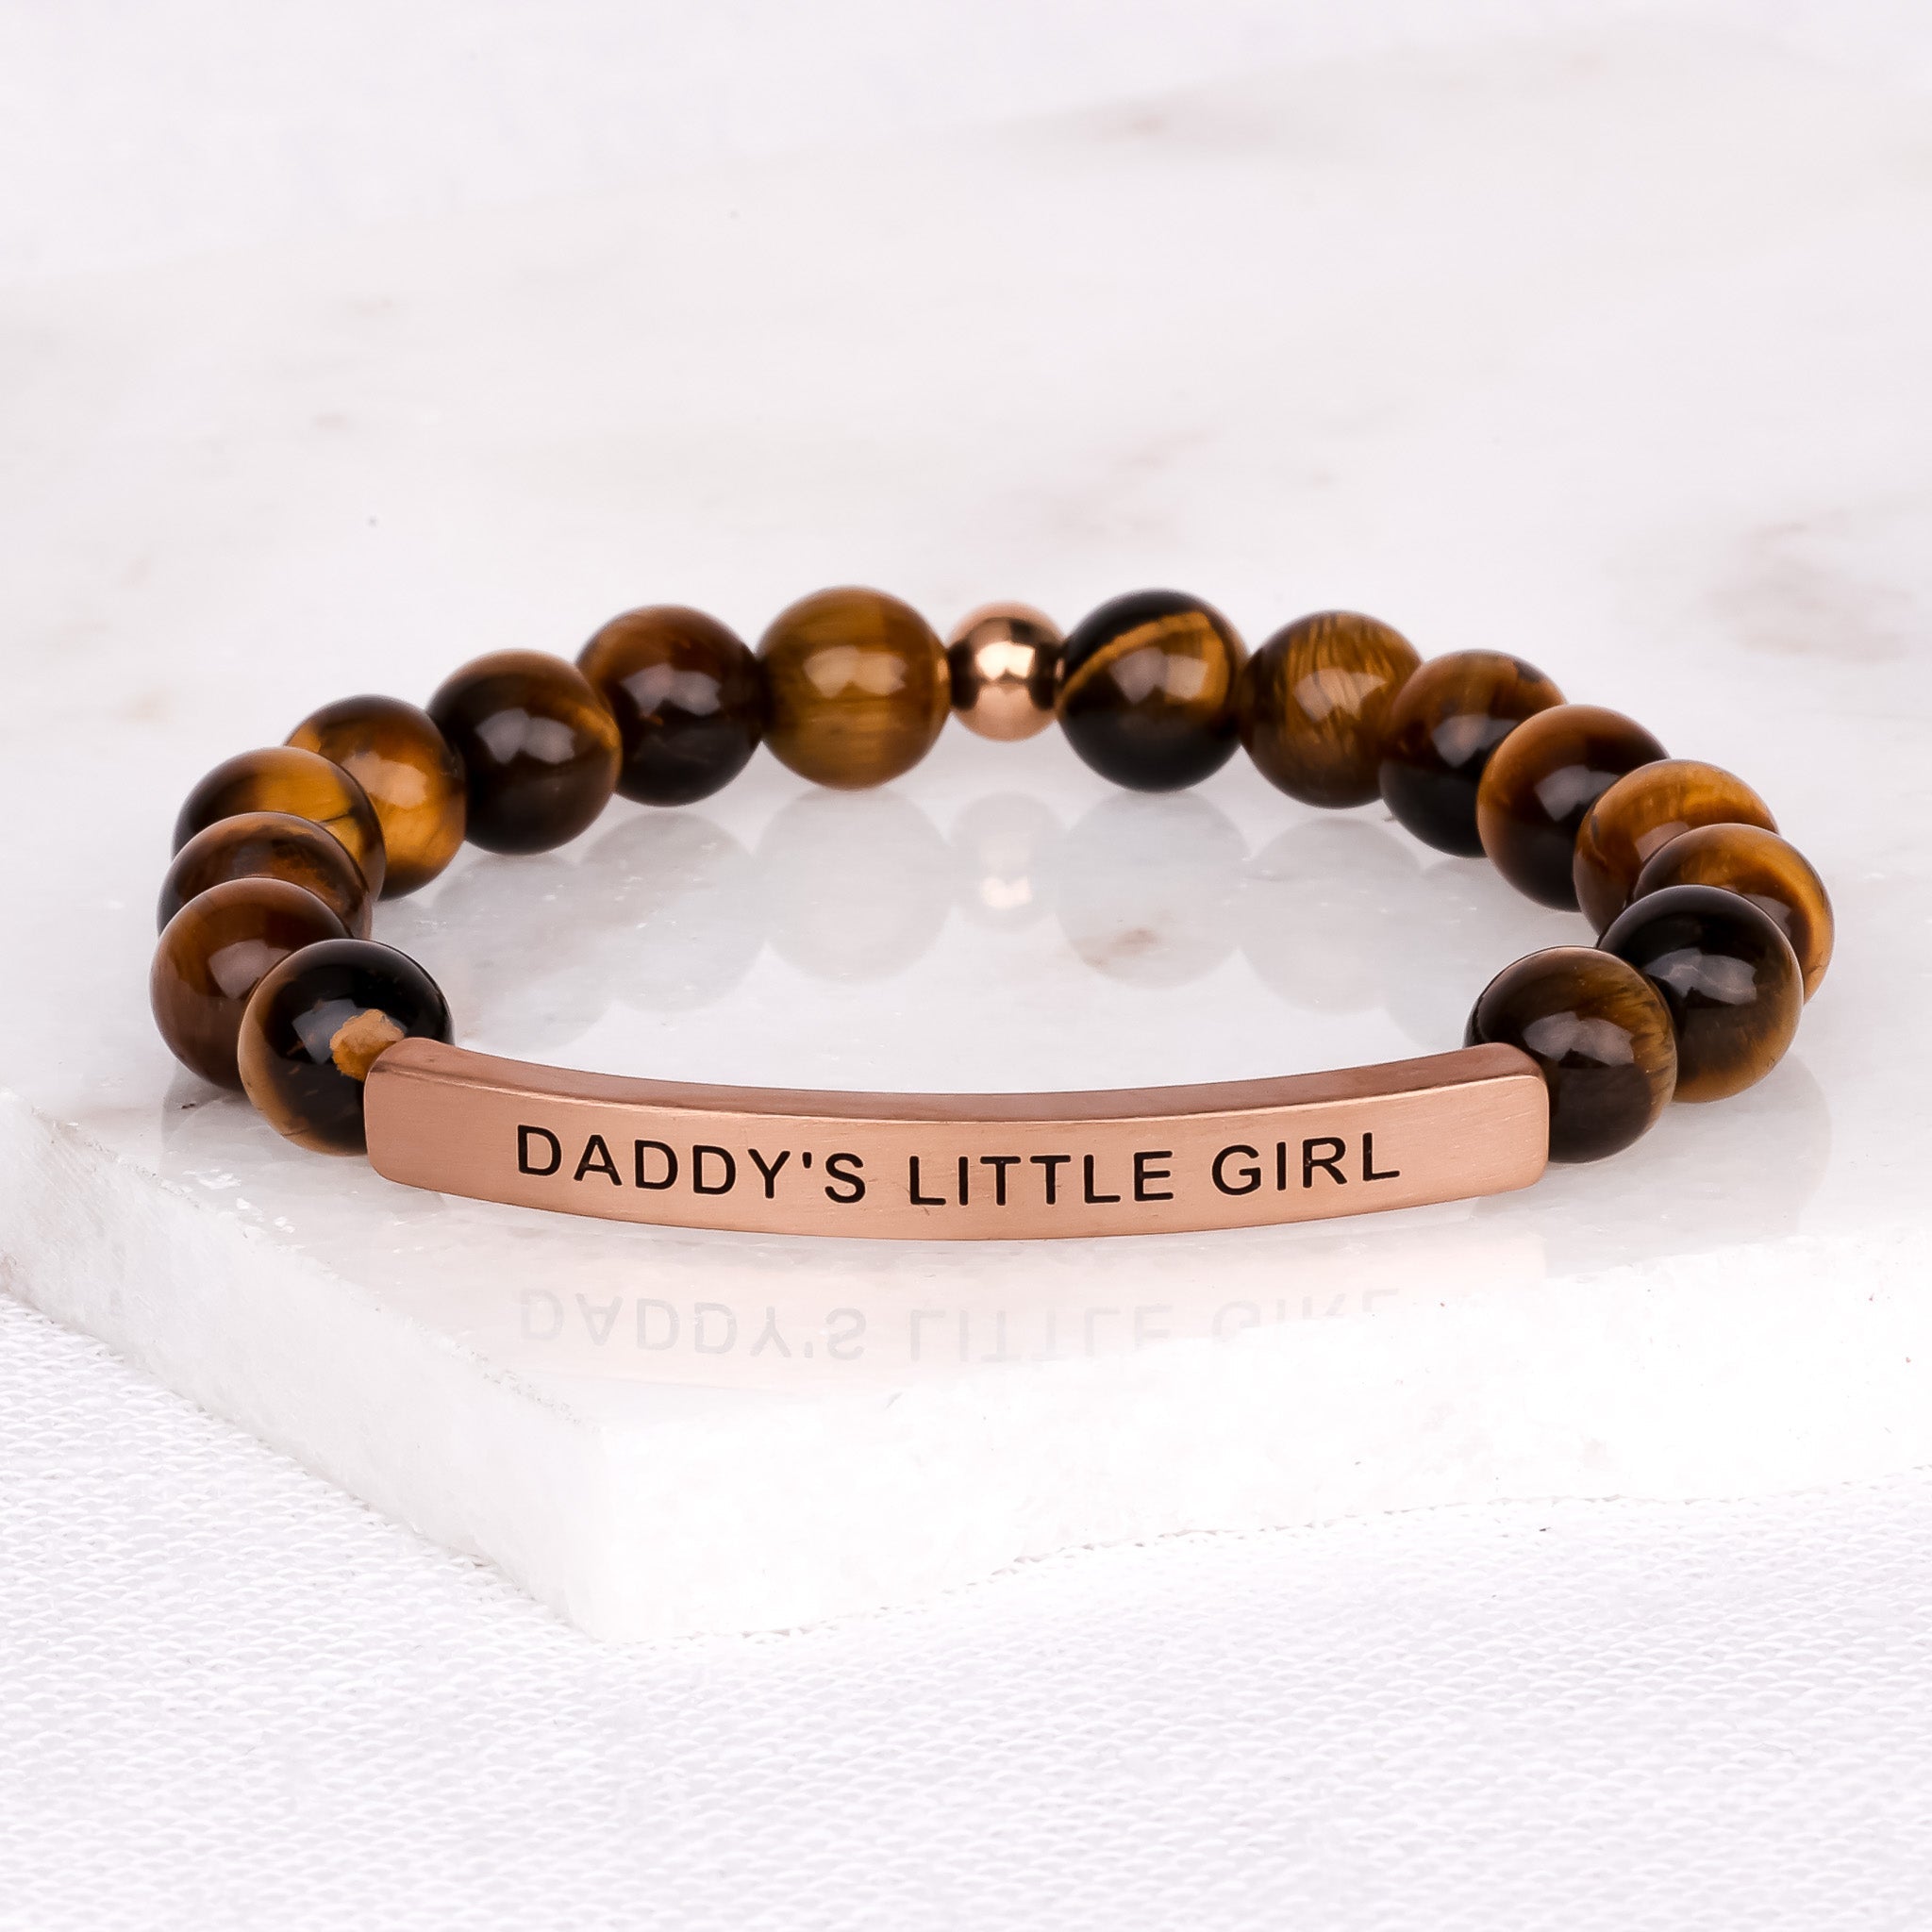 Inspire Me Bracelets - Daddy's Little Girl-Inspirational Bead Bracelet Rose Gold / Small (6in-7in) Average Woman Size